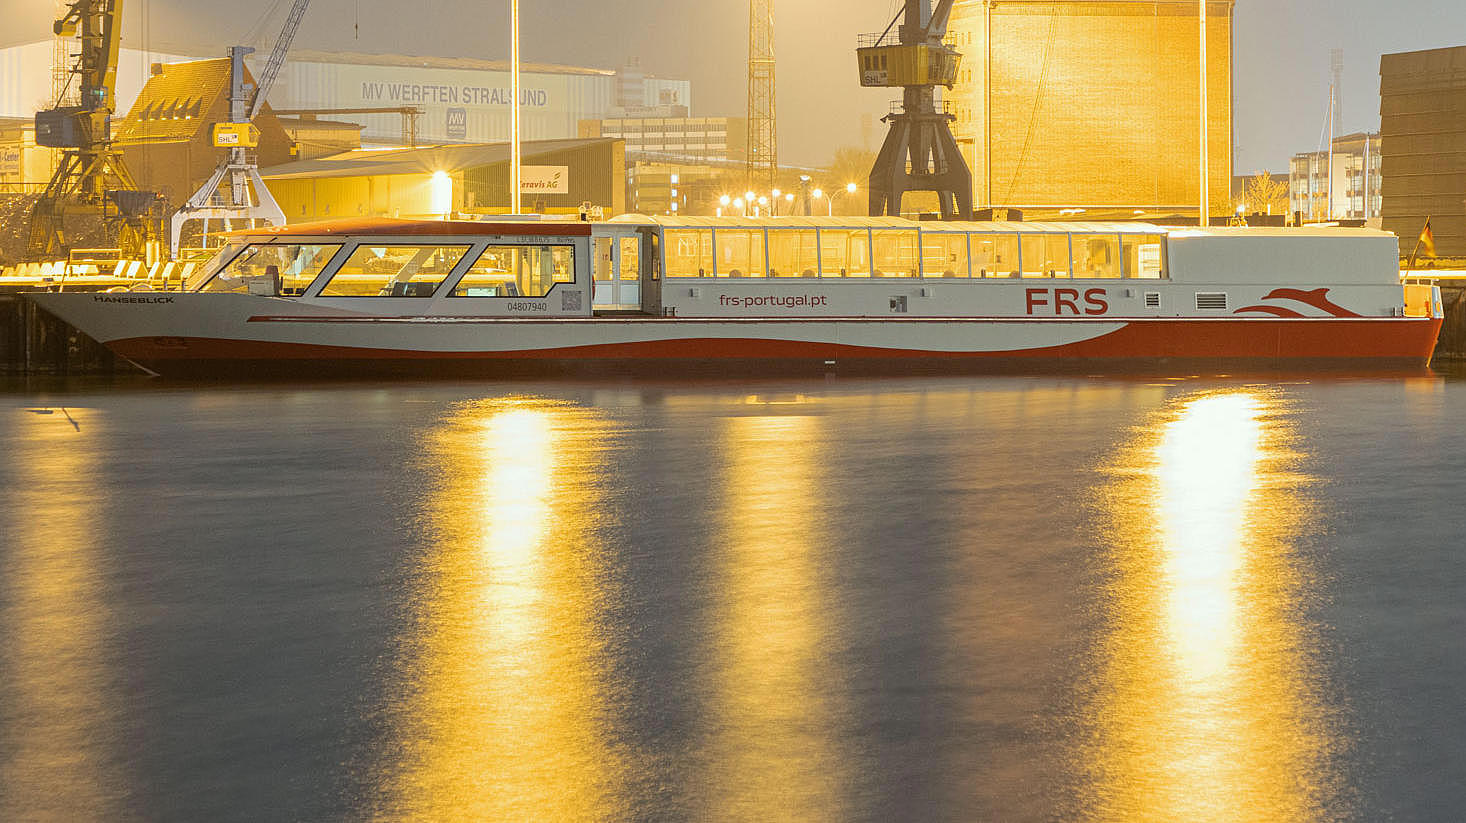 Vessel in the shipyard of Stralsund in the evening lights.